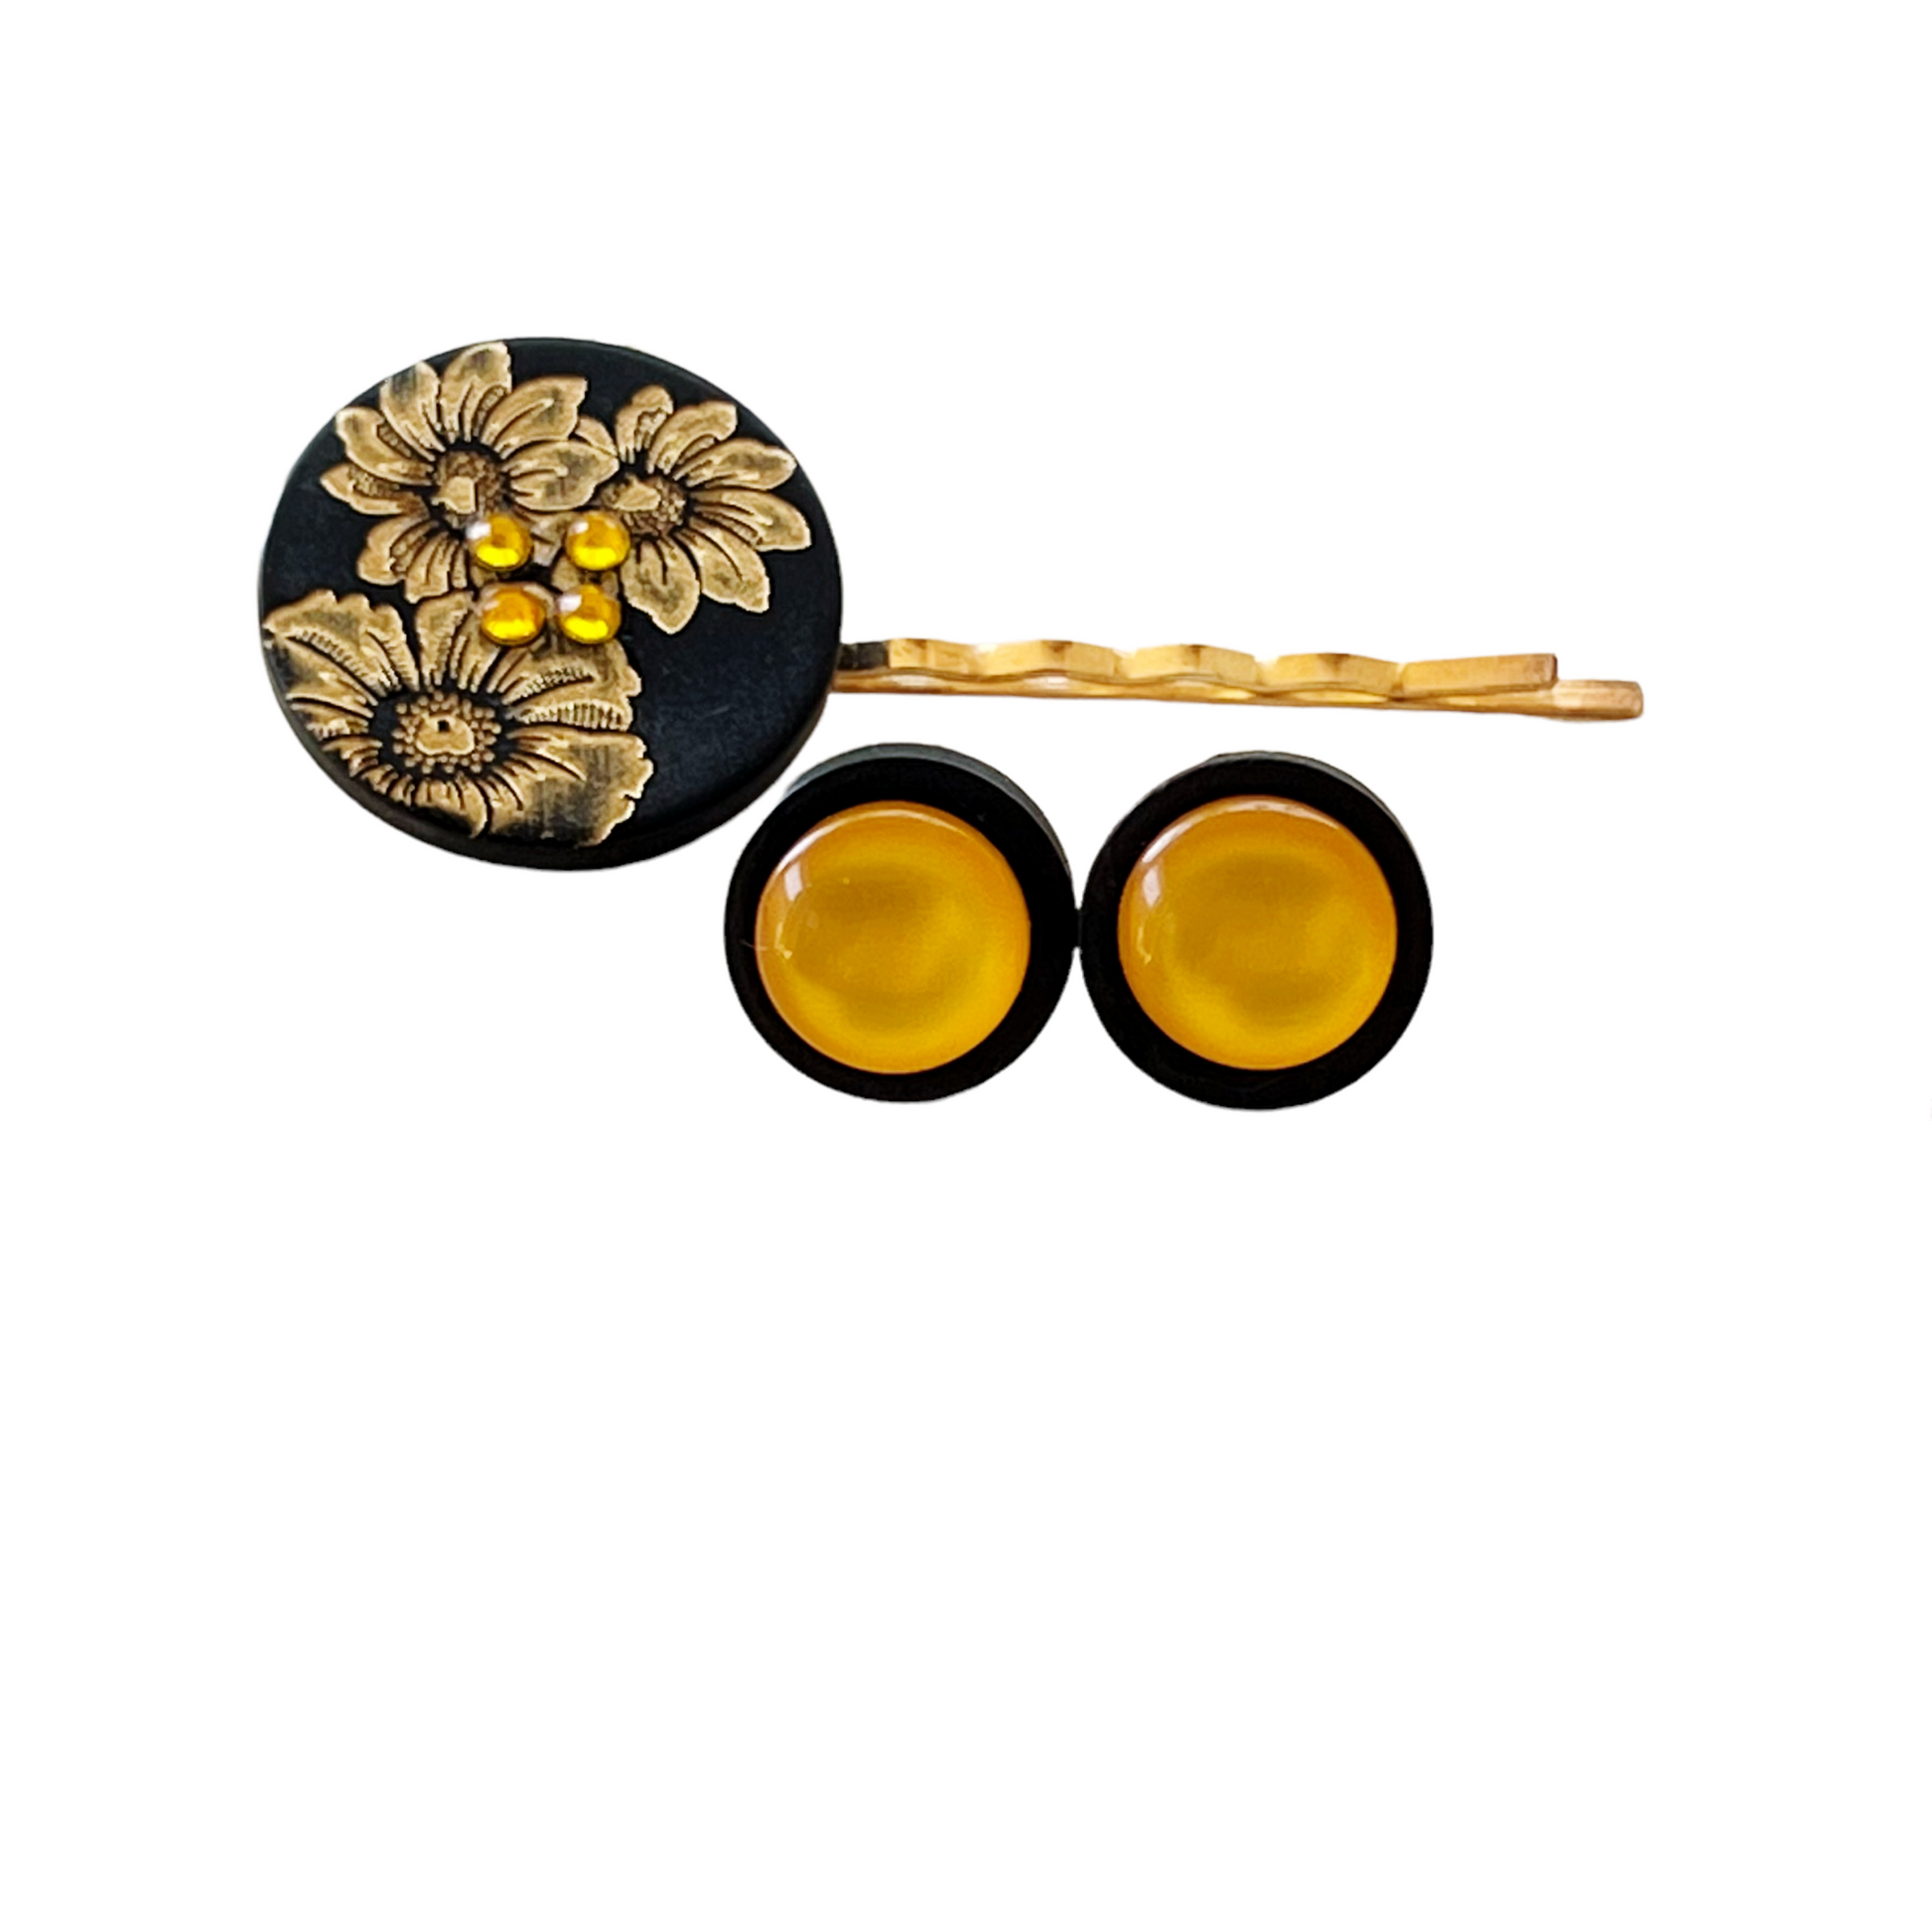 Black & Gold Sunflower Gold Bobby Pin with Matching 12mm Wood Earrings - Stylish Floral Accessories